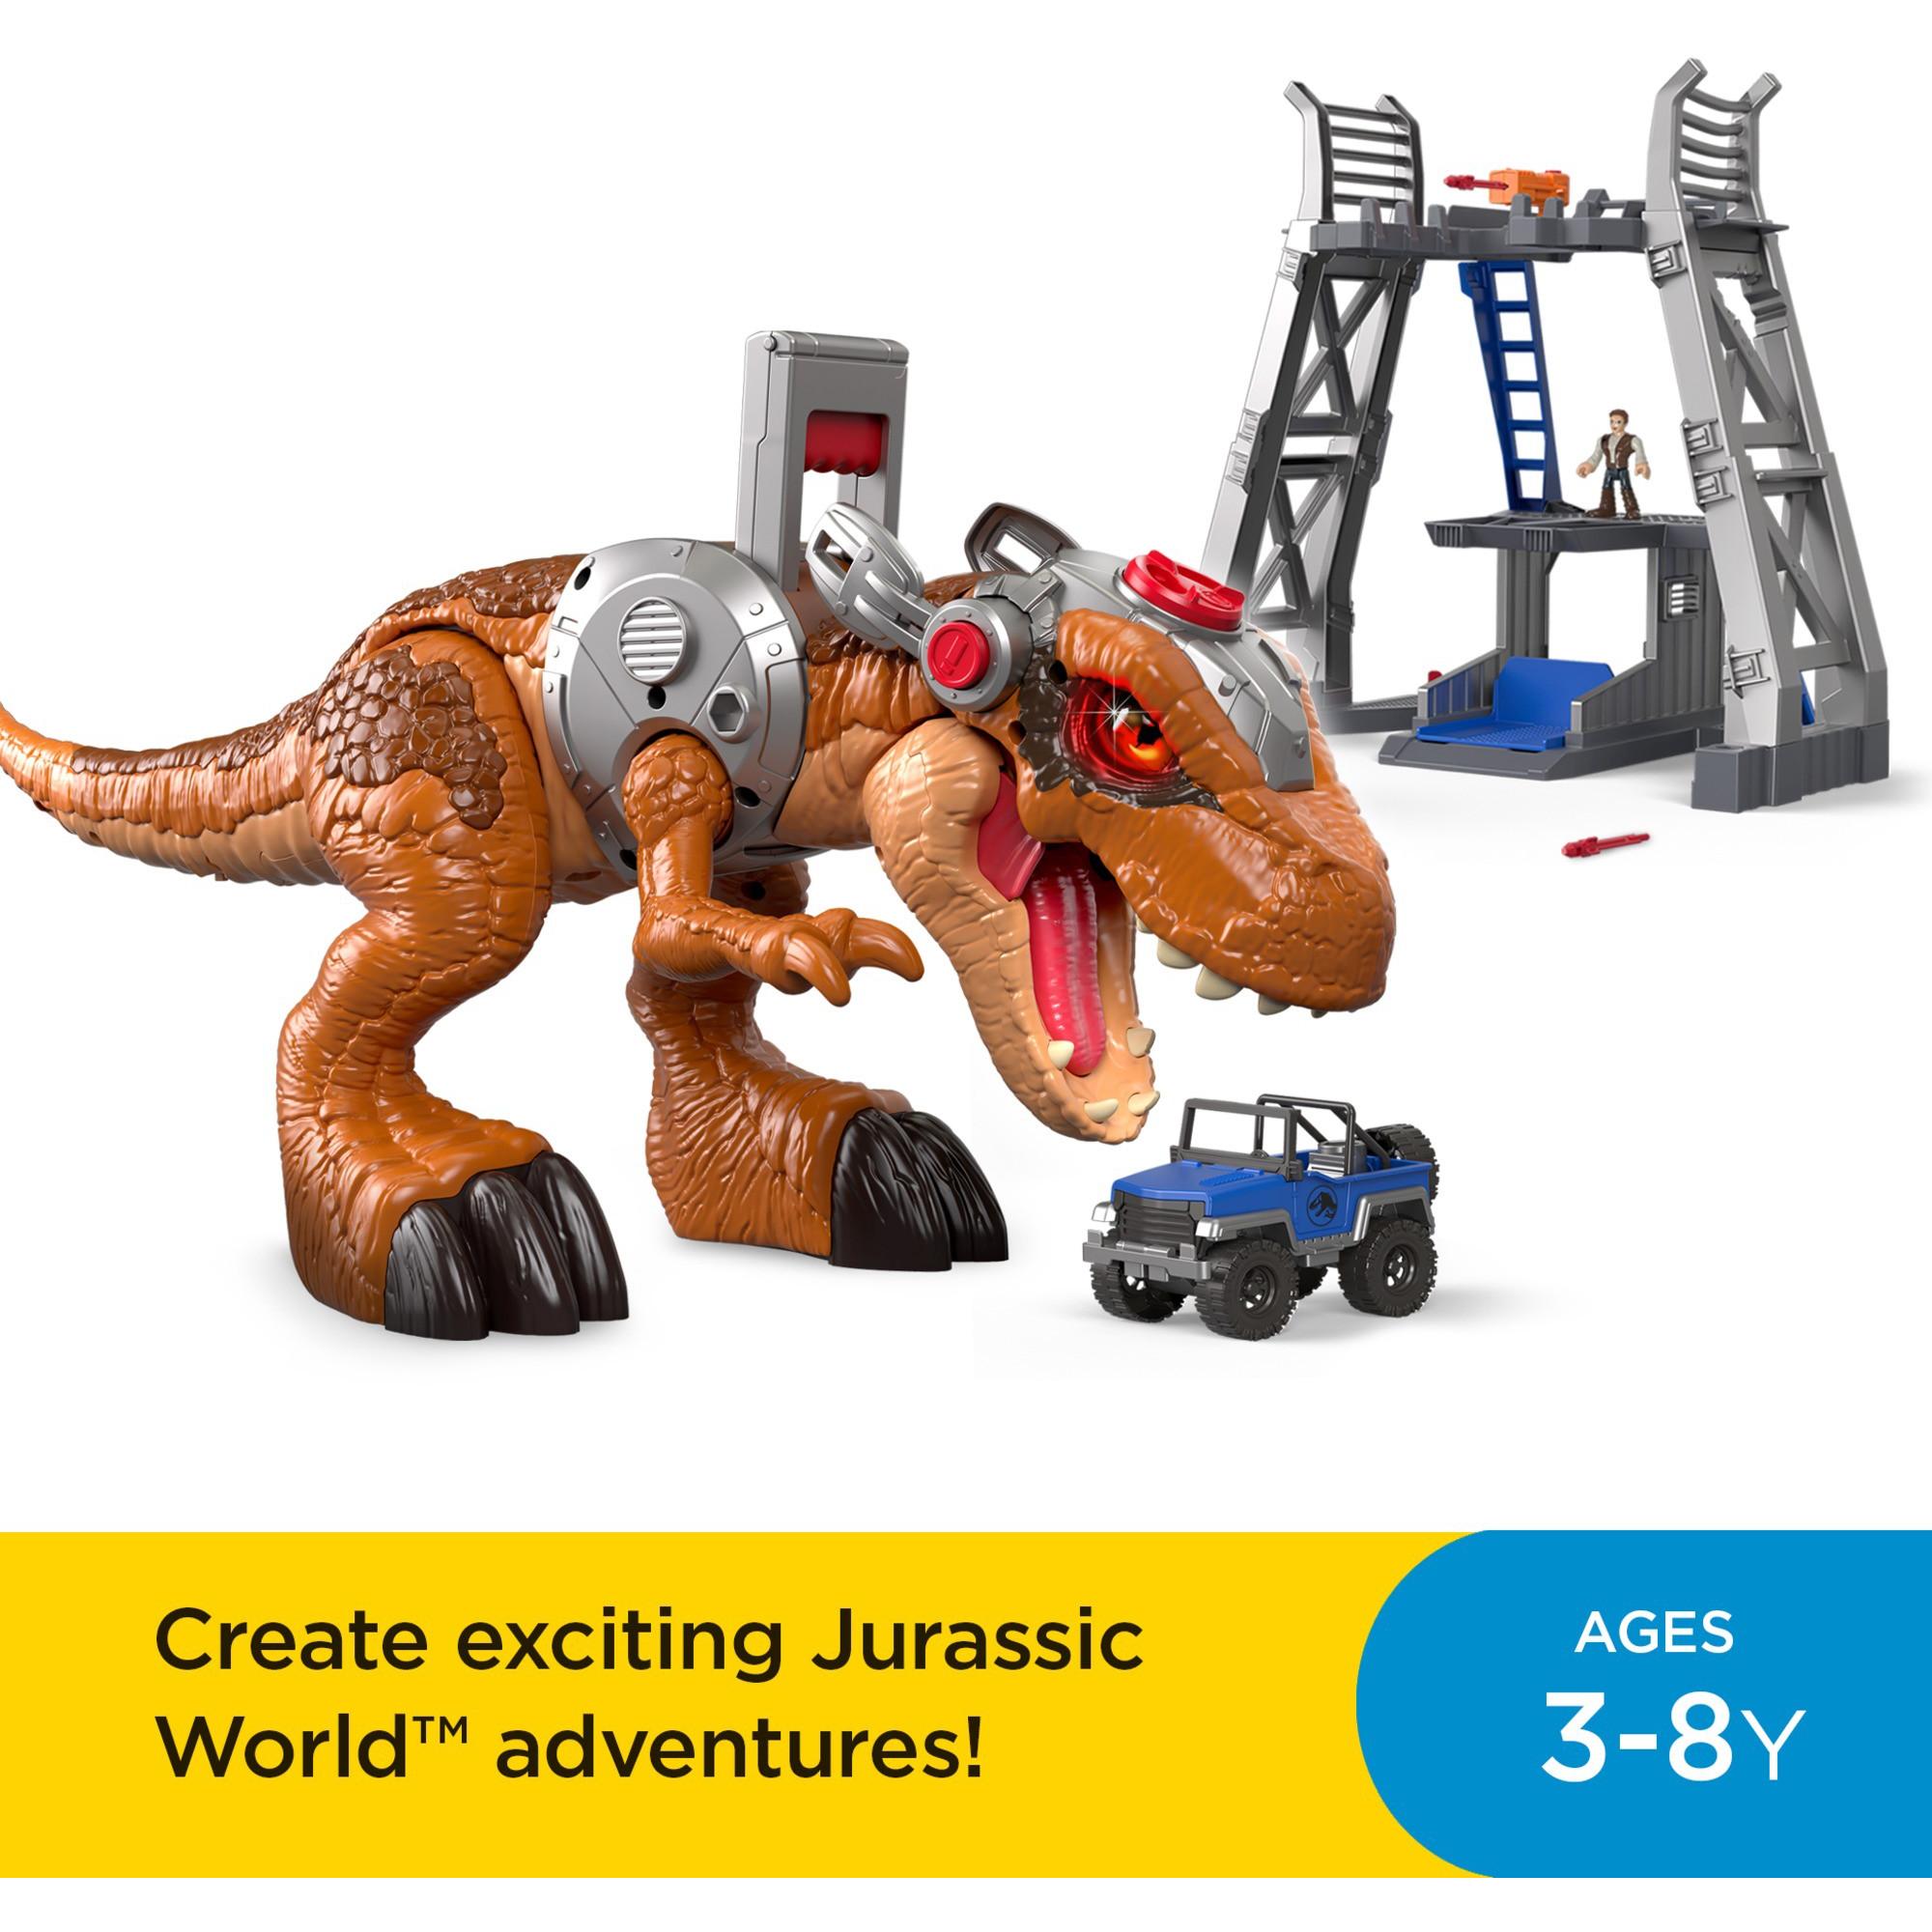 Imaginext Jurassic World Owen Grady and T. Rex Dinosaur Toy, 7-Piece set, with Lights & Motion - image 3 of 9